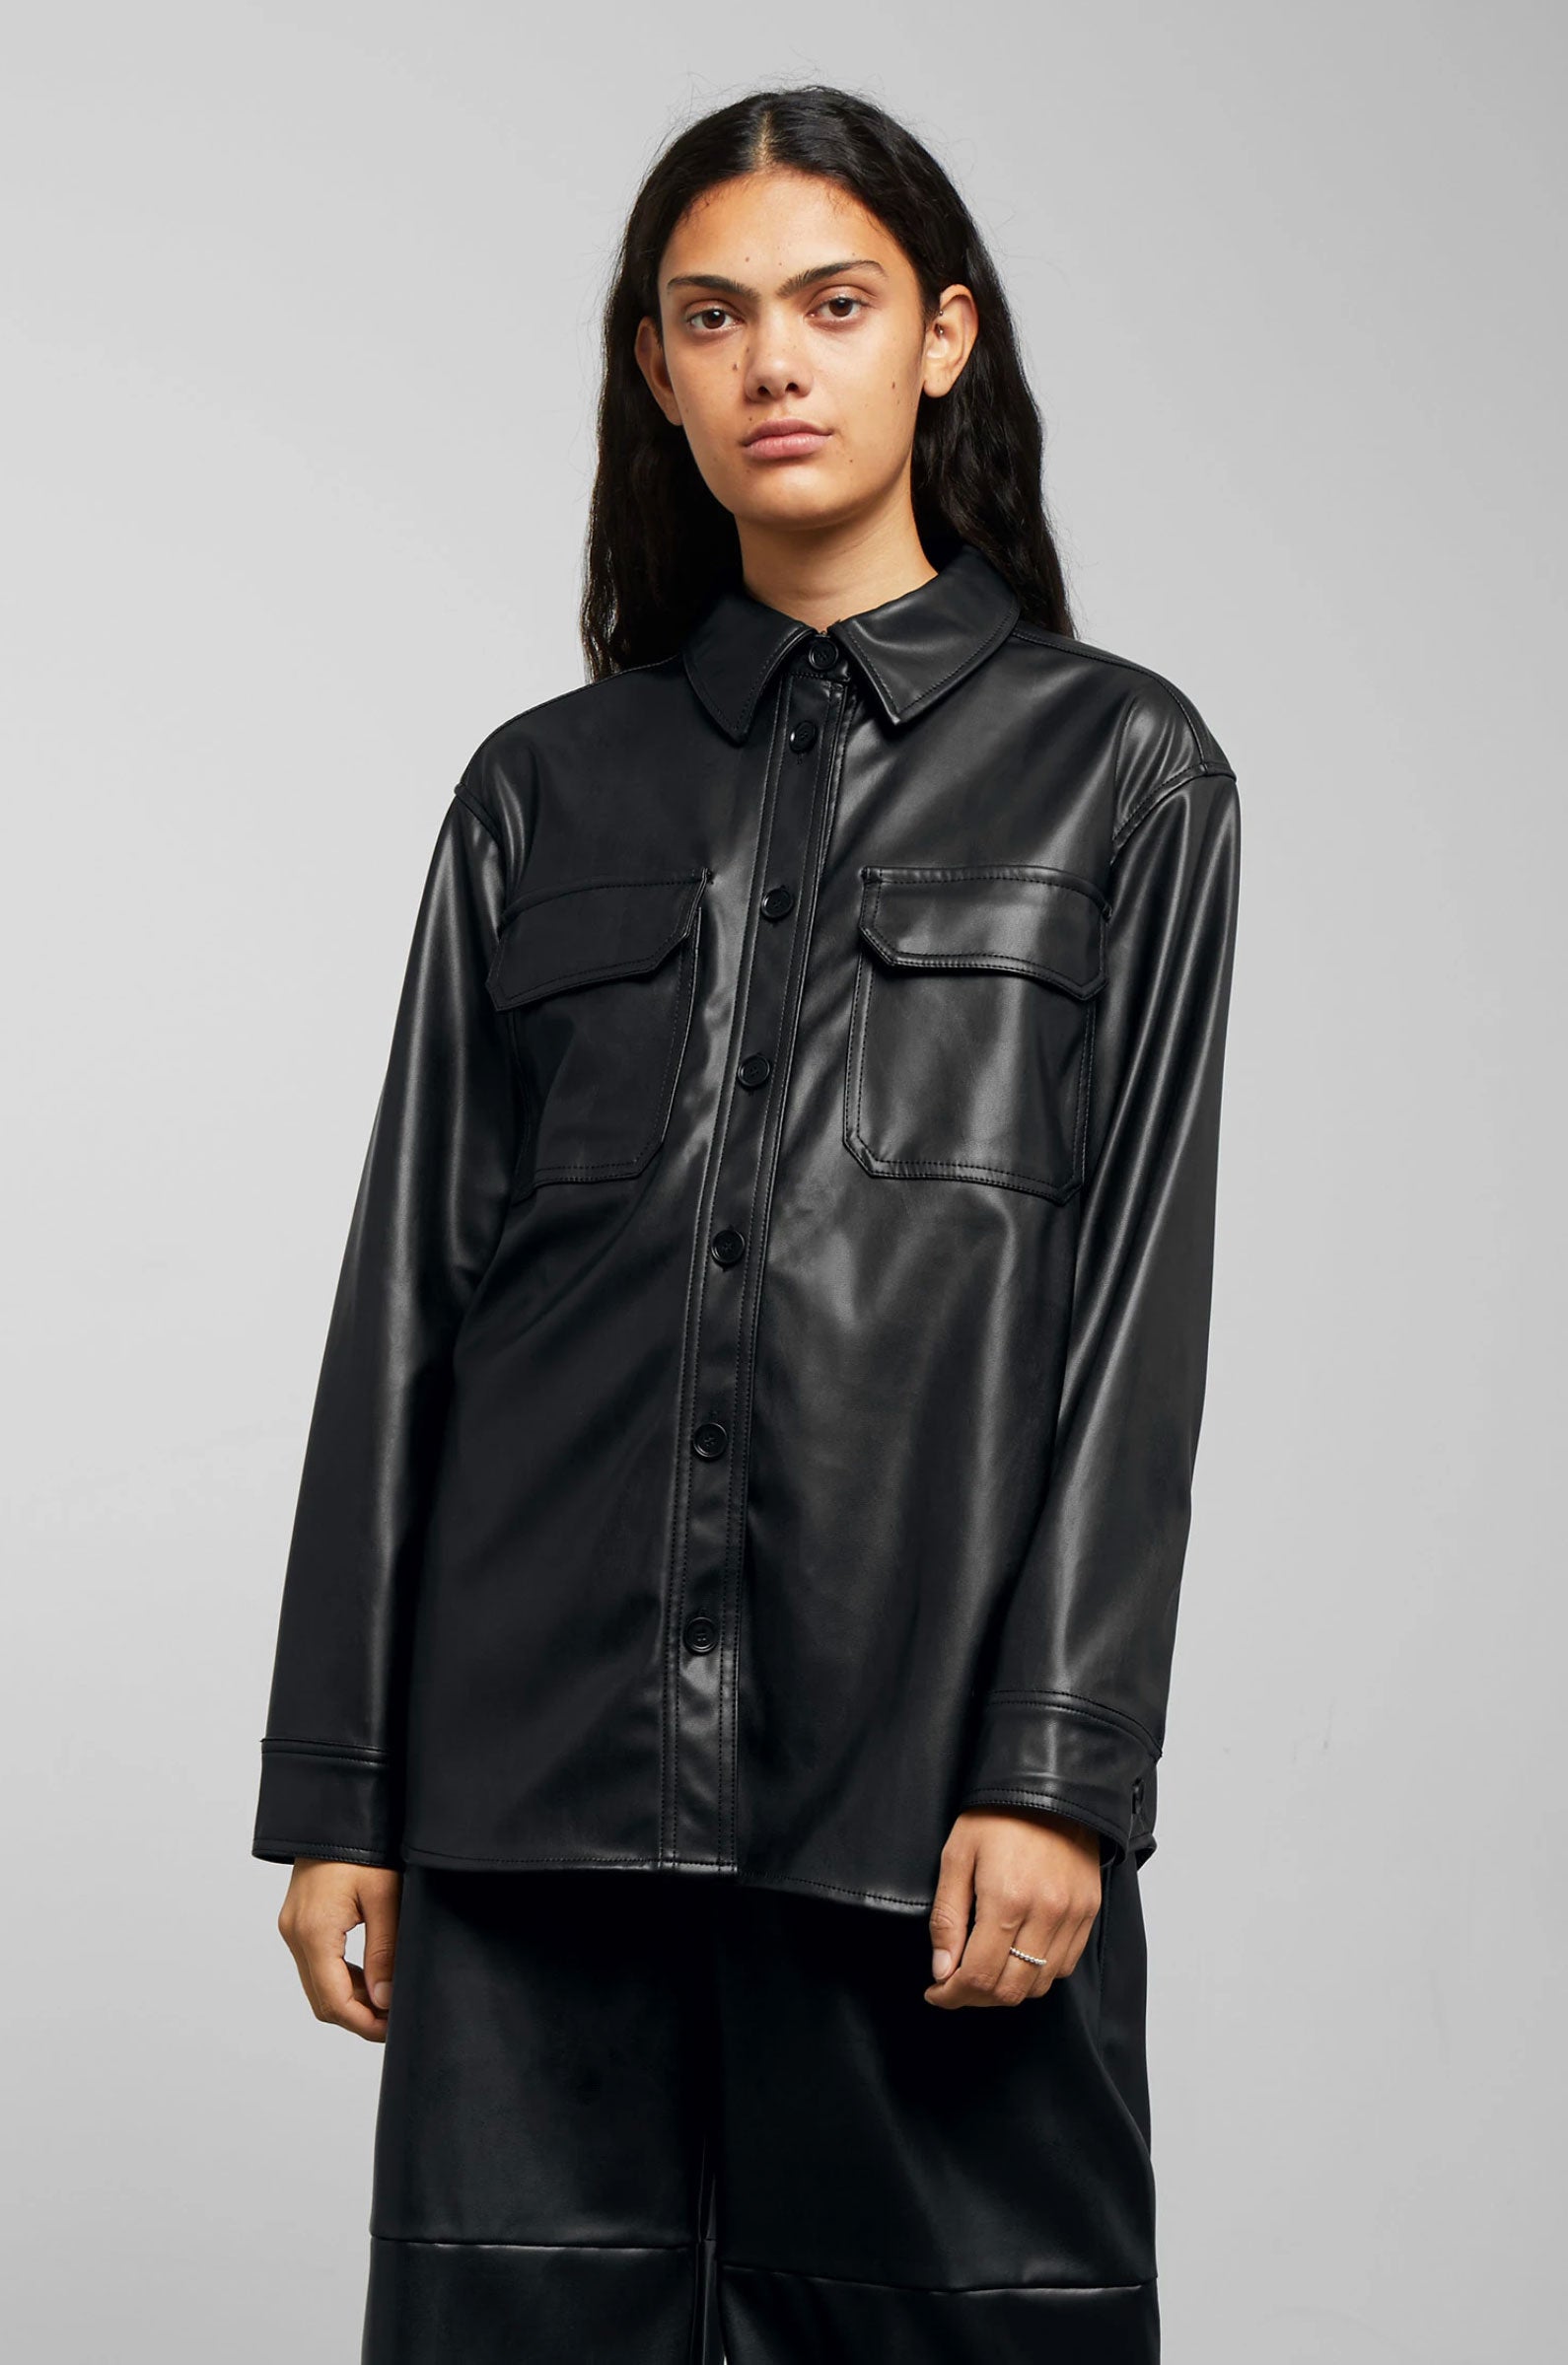 Weekday + Meet Your New Mid-Season Staple: The Leather Shirt